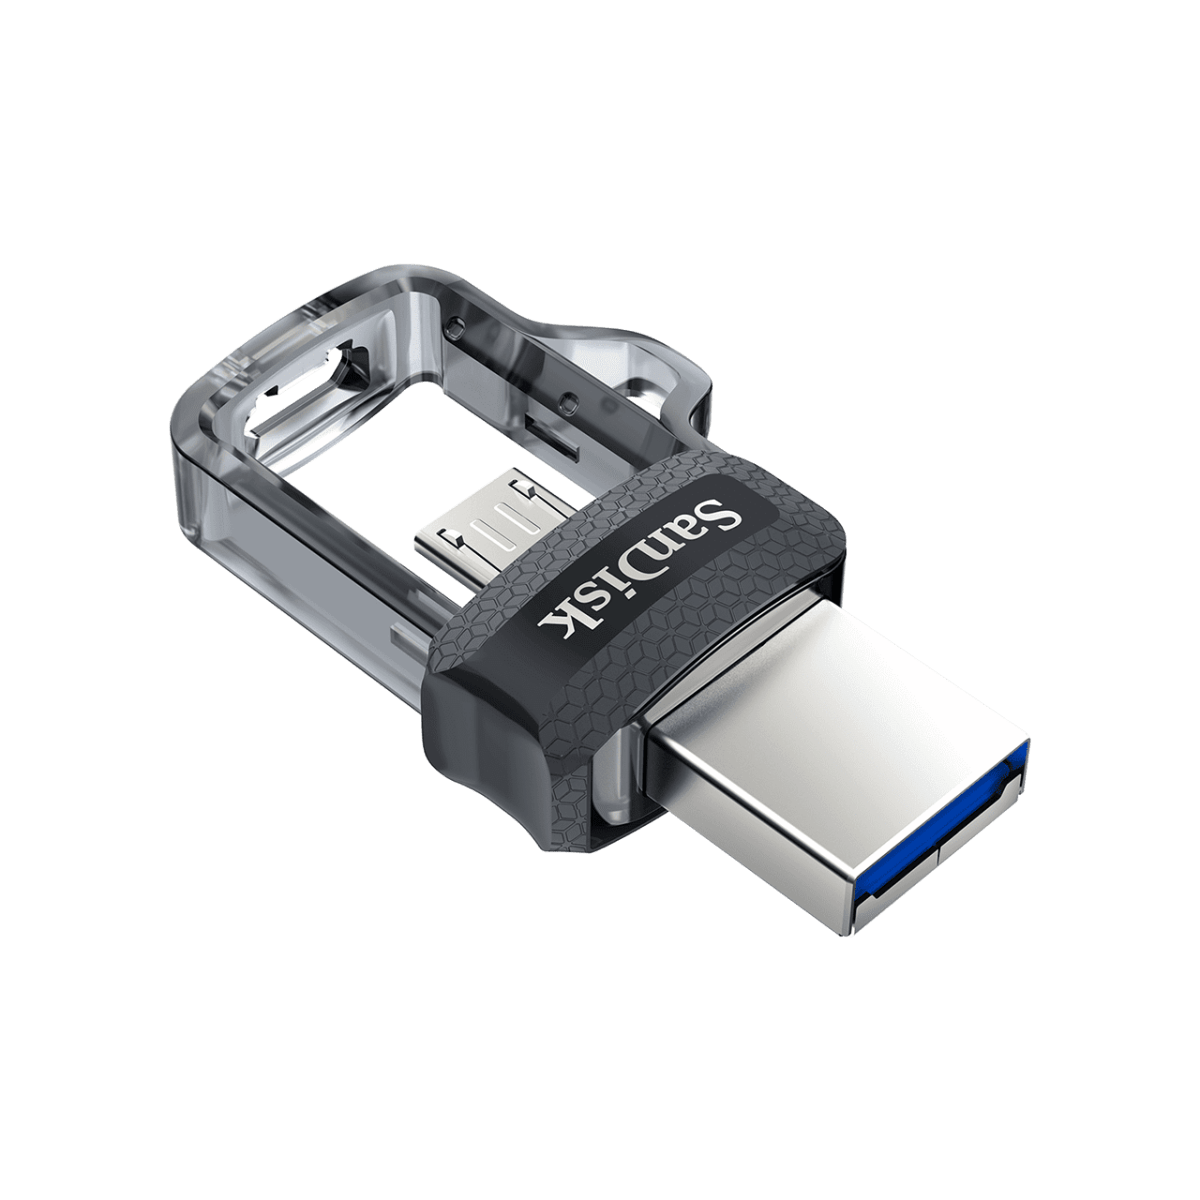 Ultra Dual Drive Usb M 3 Open Angled.png.thumb .1280.1280 Sandisk &Lt;Div Class=&Quot;Active&Quot; Data-Sku=&Quot;Sddd3-016G-A46&Quot;&Gt; &Lt;H1&Gt;Instantly Free Up Space On Your Android Smartphone&Lt;/H1&Gt; &Lt;Div Class=&Quot;Inheritpara Mb-4&Quot;&Gt; The Sandisk Ultra® Dual Drive M3.0 Makes It Easy To Transfer Content From Your Phone To Your Computer. With A Micro-Usb Connector On One End And A Usb 3.0 Connector On The Other, The Drive Lets You Move Content Easily Between Your Devices—From Your Android™ Smartphone Or Tablet To Your Laptop, Pc Or Mac Computer&Lt;A Class=&Quot;Disclosure&Quot; Href=&Quot;Https://Shop.westerndigital.com/Products/Usb-Flash-Drives/Sandisk-Ultra-Dual-Drive-M30-Usb-3-0-Micro-Usb#Disclosures&Quot; Target=&Quot;_Self&Quot; Rel=&Quot;Noopener Noreferrer&Quot; Aria-Labelledby=&Quot;Disclosures&Quot;&Gt;&Lt;Sup&Gt;1&Lt;/Sup&Gt;&Lt;/A&Gt;. The Usb 3.0 Connector Is High-Performance And Backward-Compatible With Usb 2.0 Ports. The Sandisk® Memory Zone App&Lt;A Class=&Quot;Disclosure&Quot; Href=&Quot;Https://Shop.westerndigital.com/Products/Usb-Flash-Drives/Sandisk-Ultra-Dual-Drive-M30-Usb-3-0-Micro-Usb#Disclosures&Quot; Target=&Quot;_Self&Quot; Rel=&Quot;Noopener Noreferrer&Quot; Aria-Labelledby=&Quot;Disclosures&Quot;&Gt;&Lt;Sup&Gt;2&Lt;/Sup&Gt;&Lt;/A&Gt; For Android (Available On Google Play) Helps You Manage Your Device’s Memory And Your Content. &Lt;Strong&Gt;Warranty&Lt;/Strong&Gt; The Sandisk Ultra Flair Usb 3.0 Flash Drive Is Backed By A Five-Year Manufacturer Warranty&Lt;A Class=&Quot;Disclosure&Quot; Href=&Quot;Https://Shop.westerndigital.com/Products/Usb-Flash-Drives/Sandisk-Ultra-Flair-Usb-3-0#Disclosures&Quot; Target=&Quot;_Self&Quot; Rel=&Quot;Noopener Noreferrer&Quot; Aria-Labelledby=&Quot;Disclosures&Quot;&Gt;&Lt;Sup&Gt;2&Lt;/Sup&Gt;&Lt;/A&Gt; &Lt;/Div&Gt; &Lt;/Div&Gt; Sandisk Ultra Dual Drive M3.0 Flash Drive For Android Smartphones (32Gb)